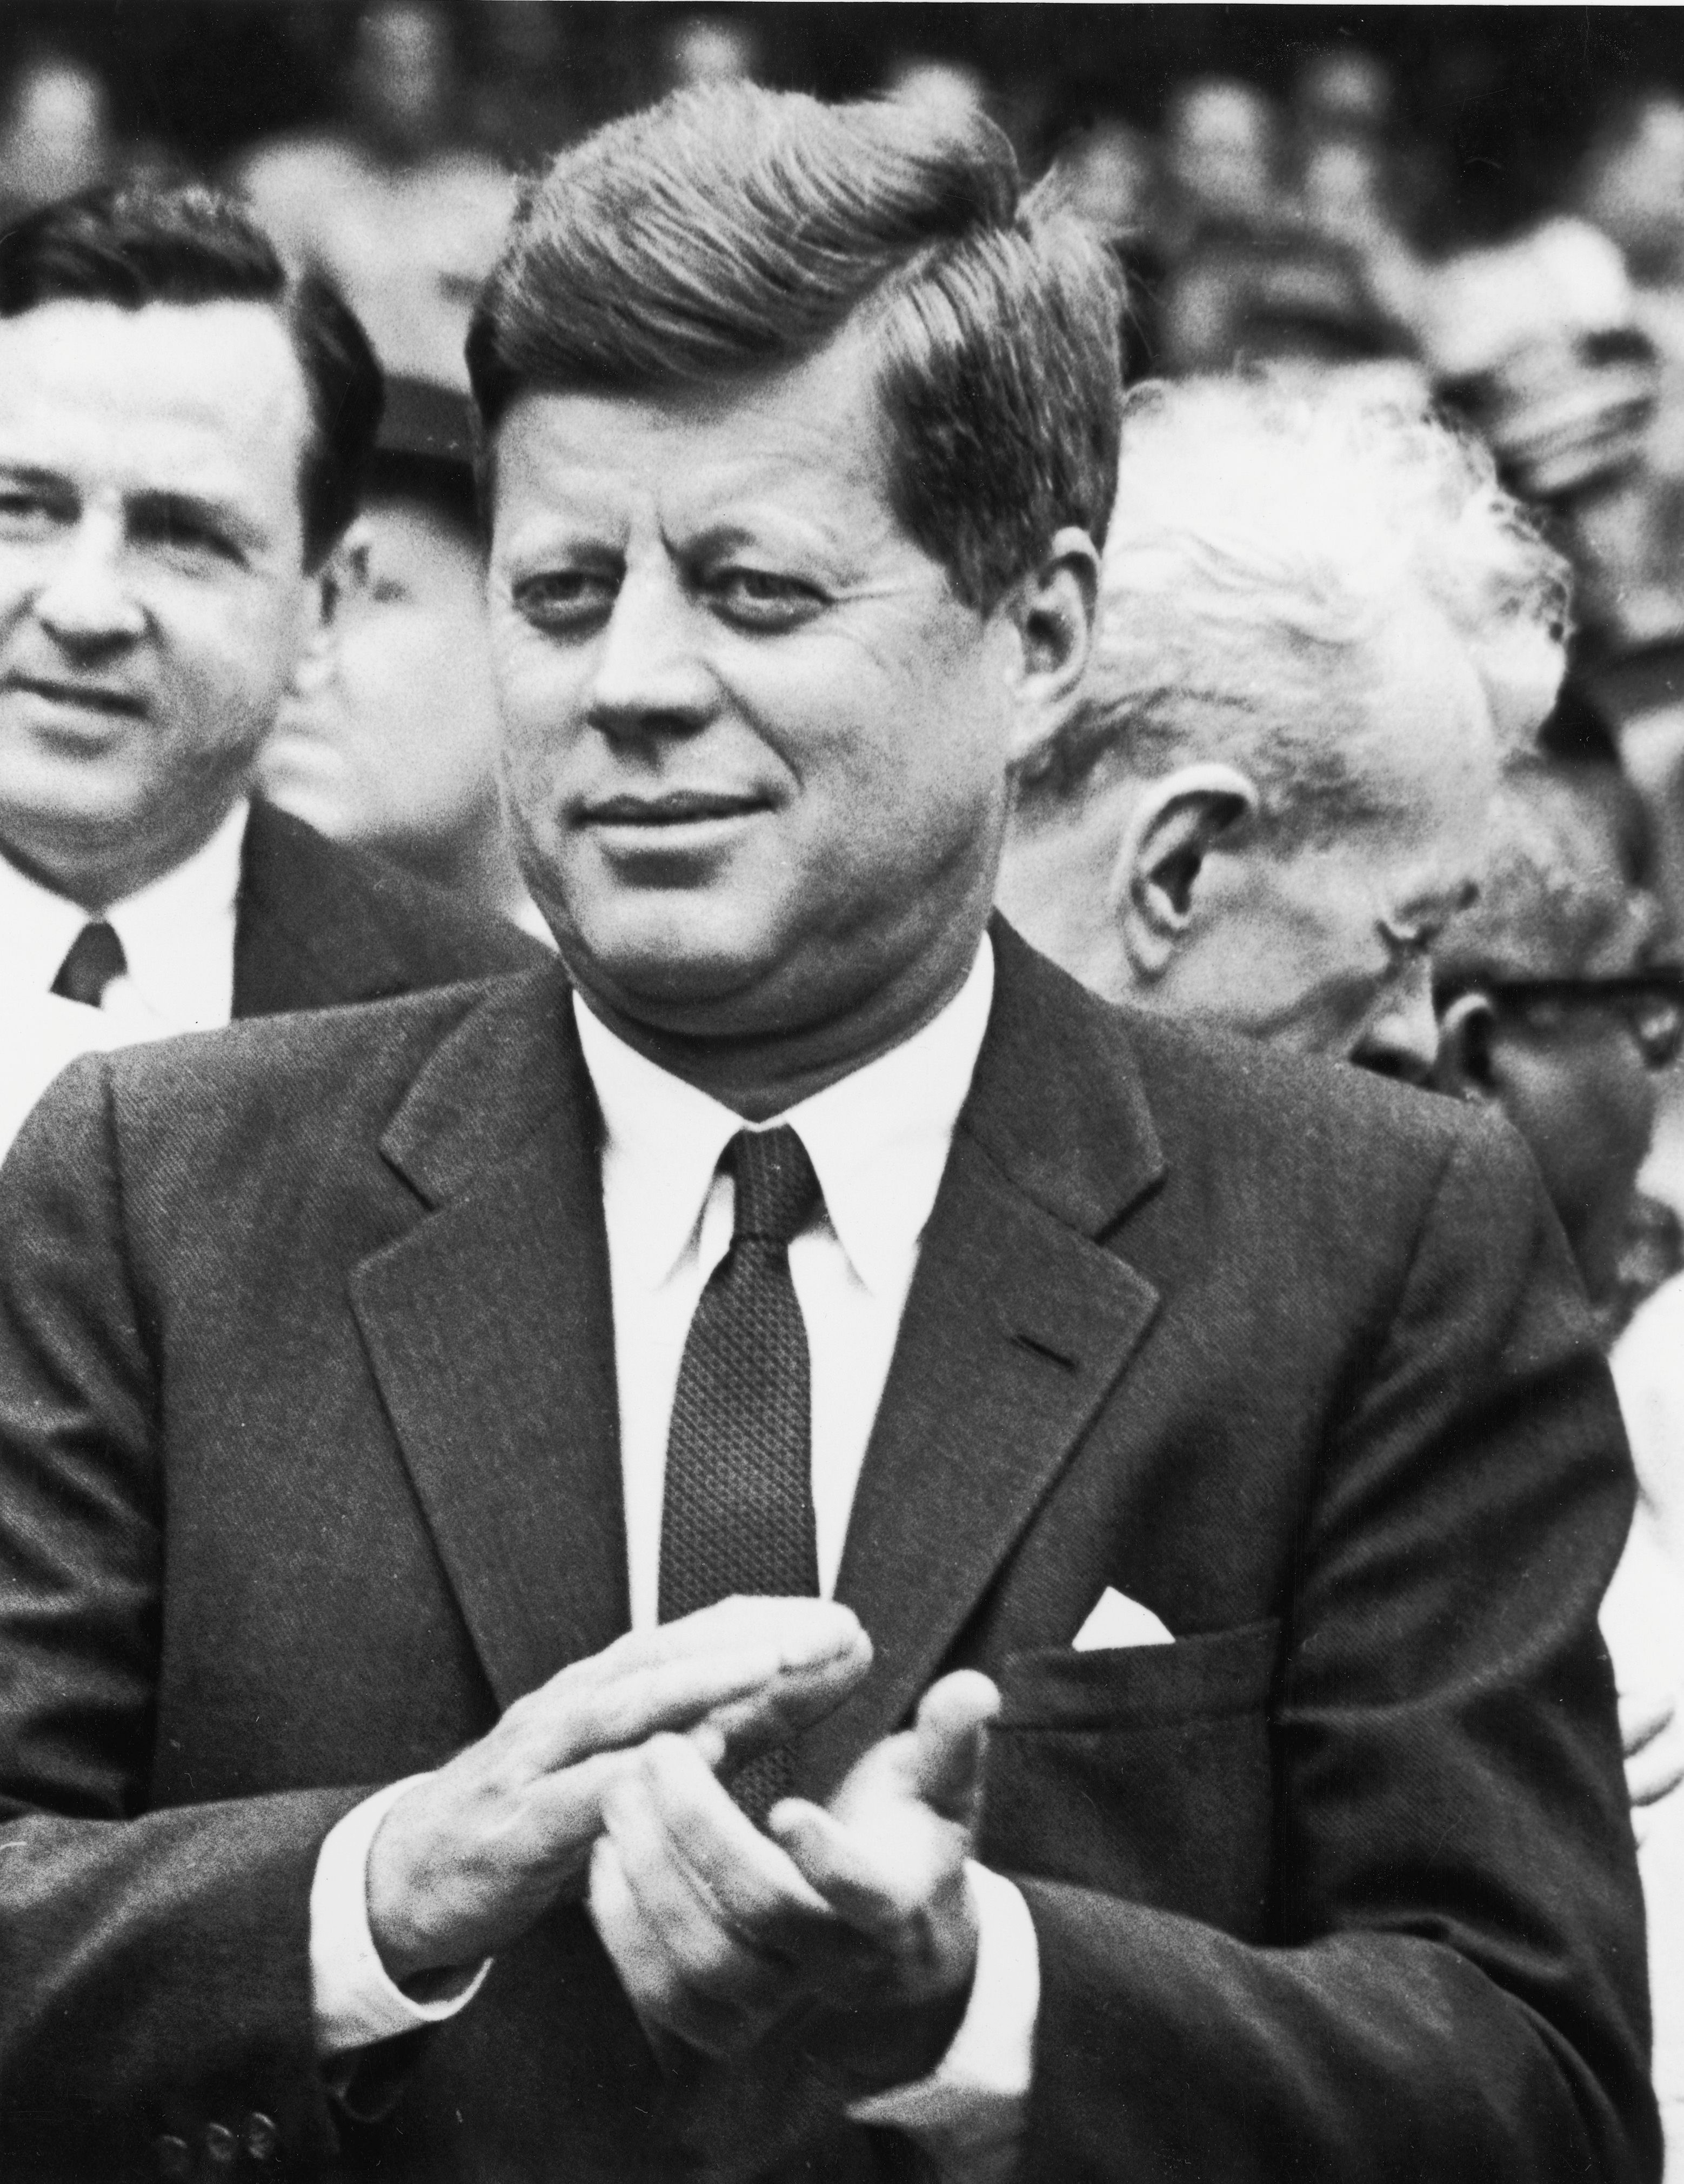 US President John F. Kennedy during a Washington Senators baseball game in Washington D.C., in the early 1960s. | Source: Robert Riger/Getty Images